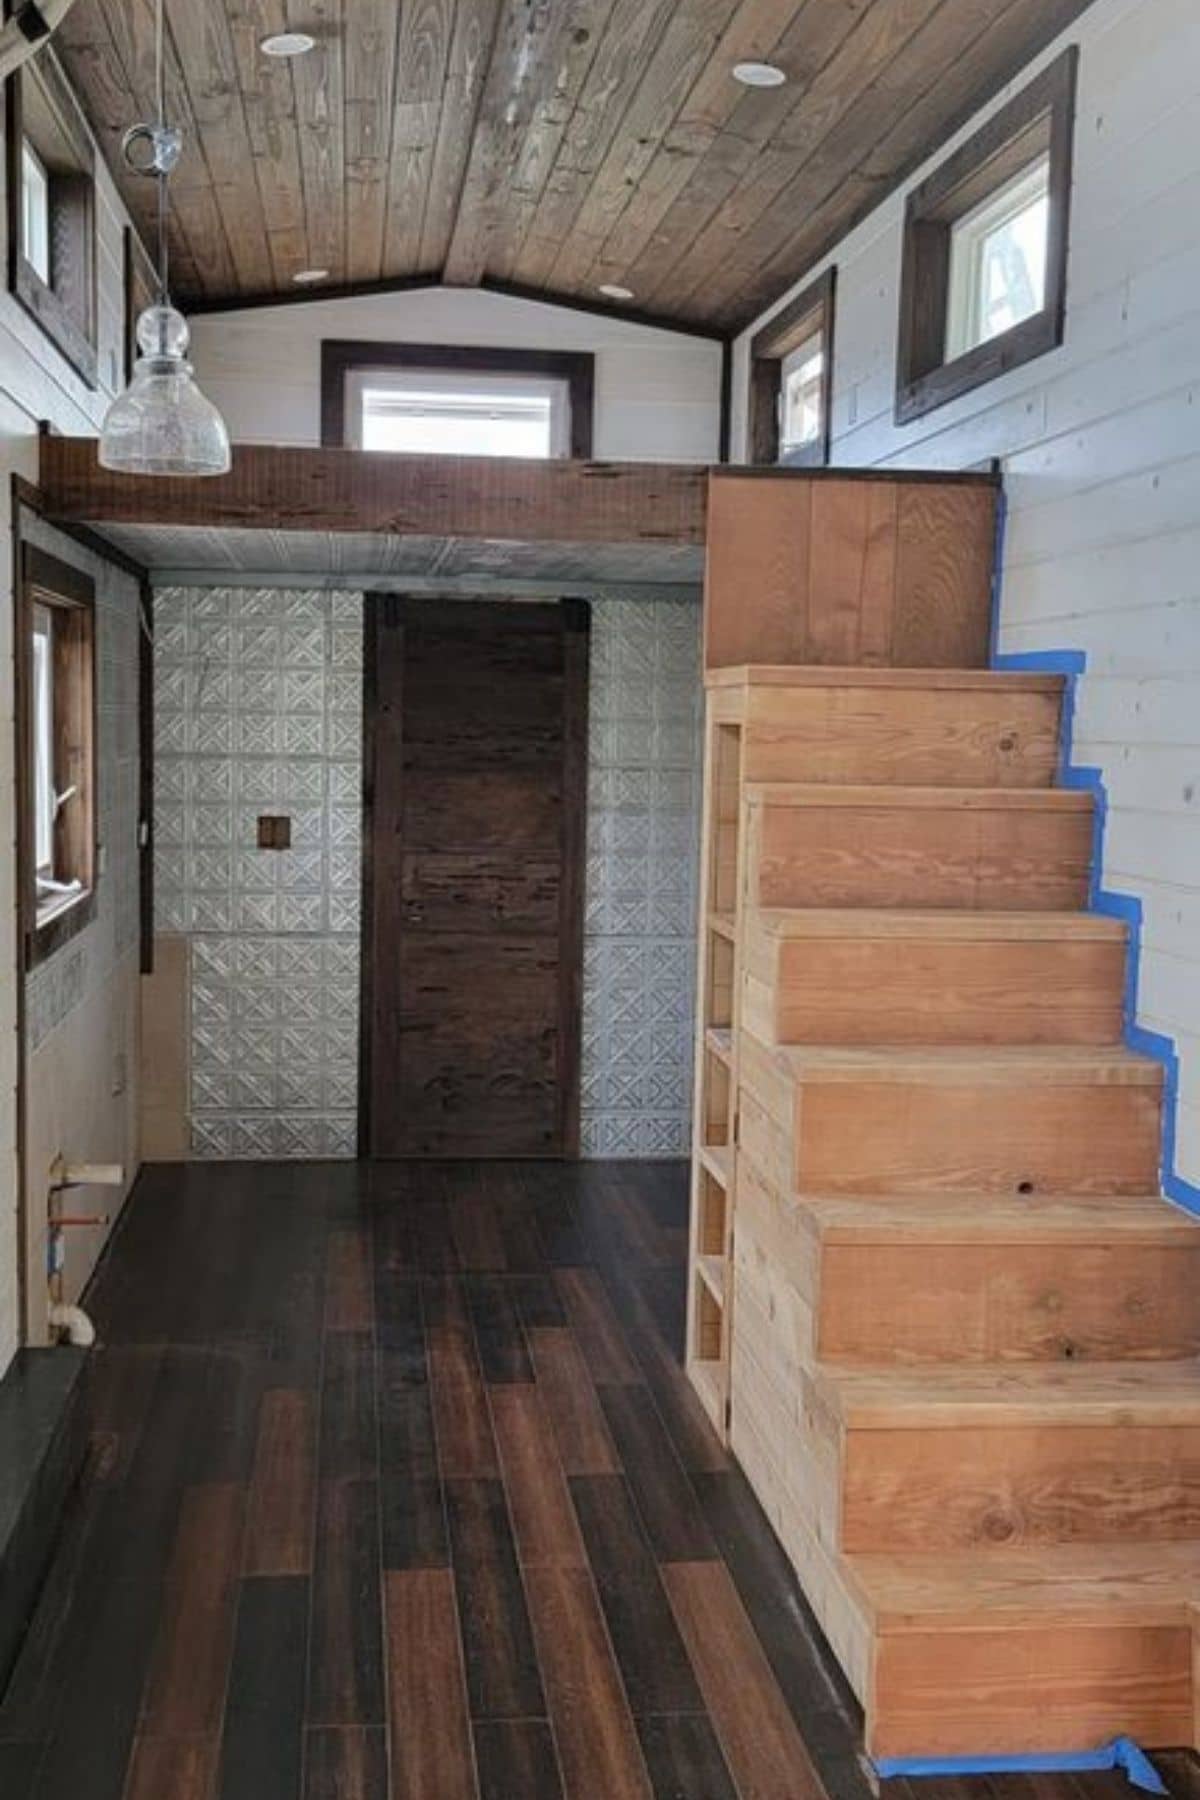 view of tiny home interior with stairs on right and bathroom door in background